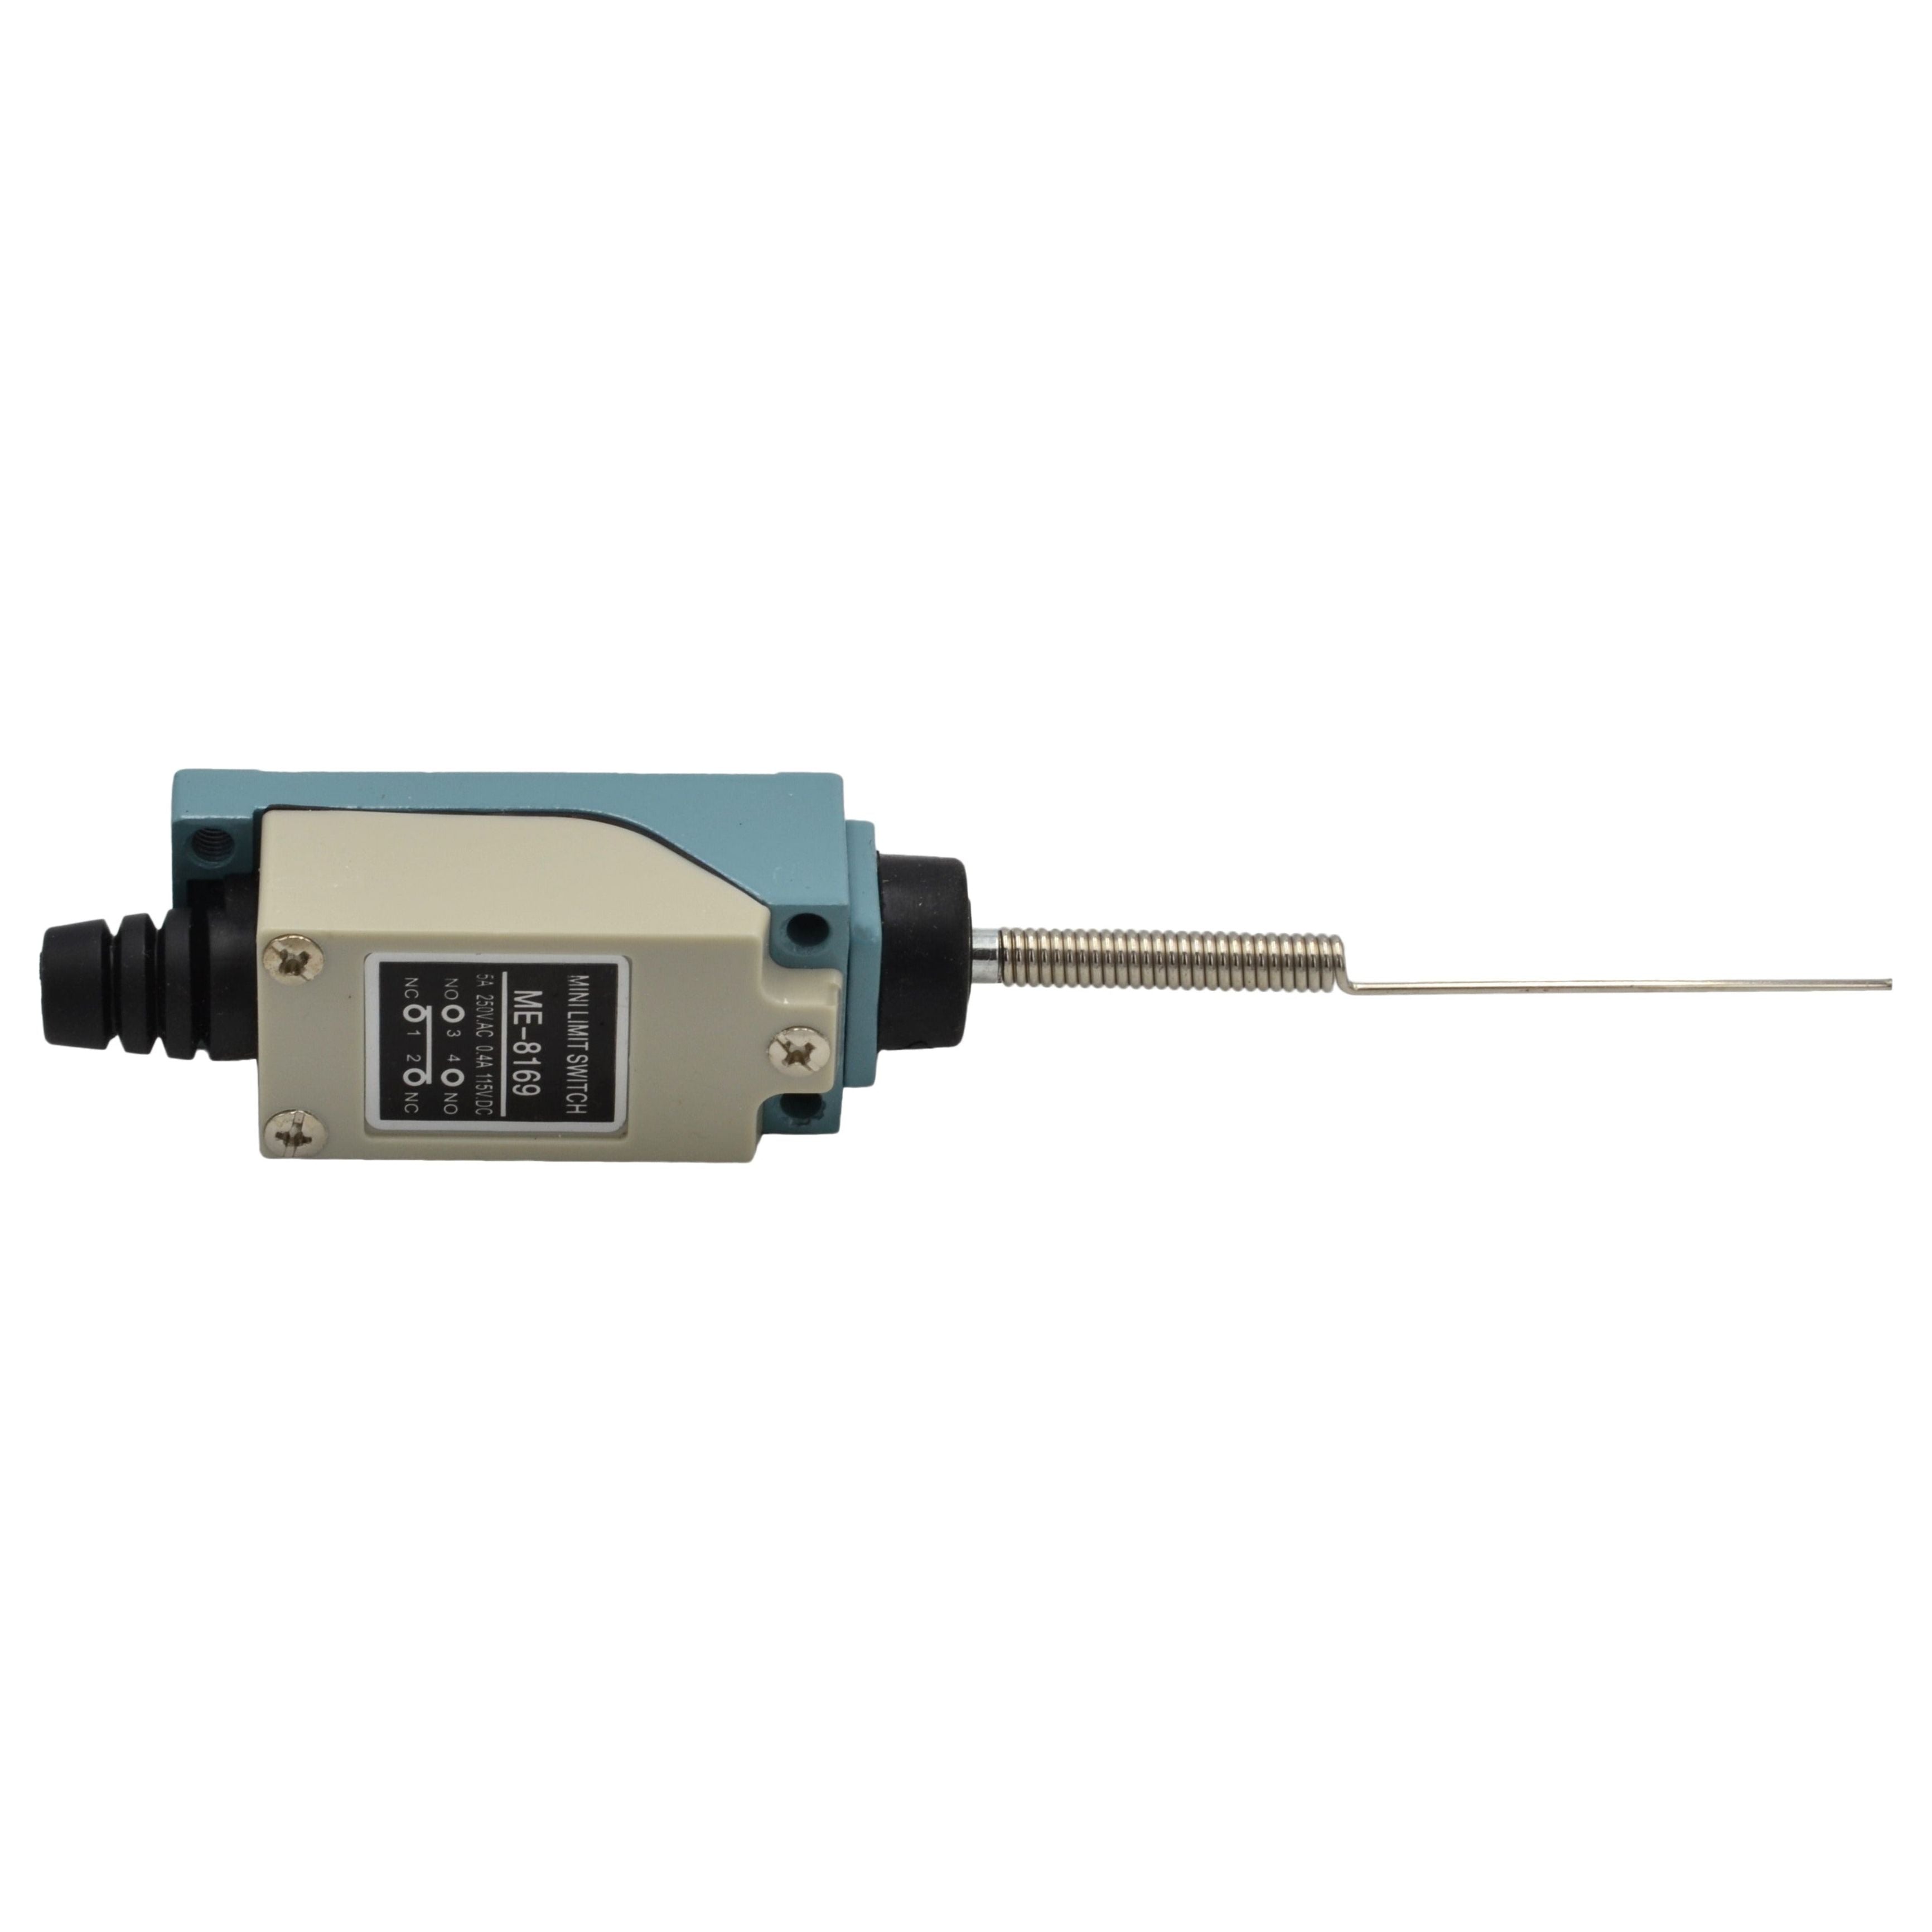 ME-8169 Momentary Flexible Spring Arm Actuator Limit Switch